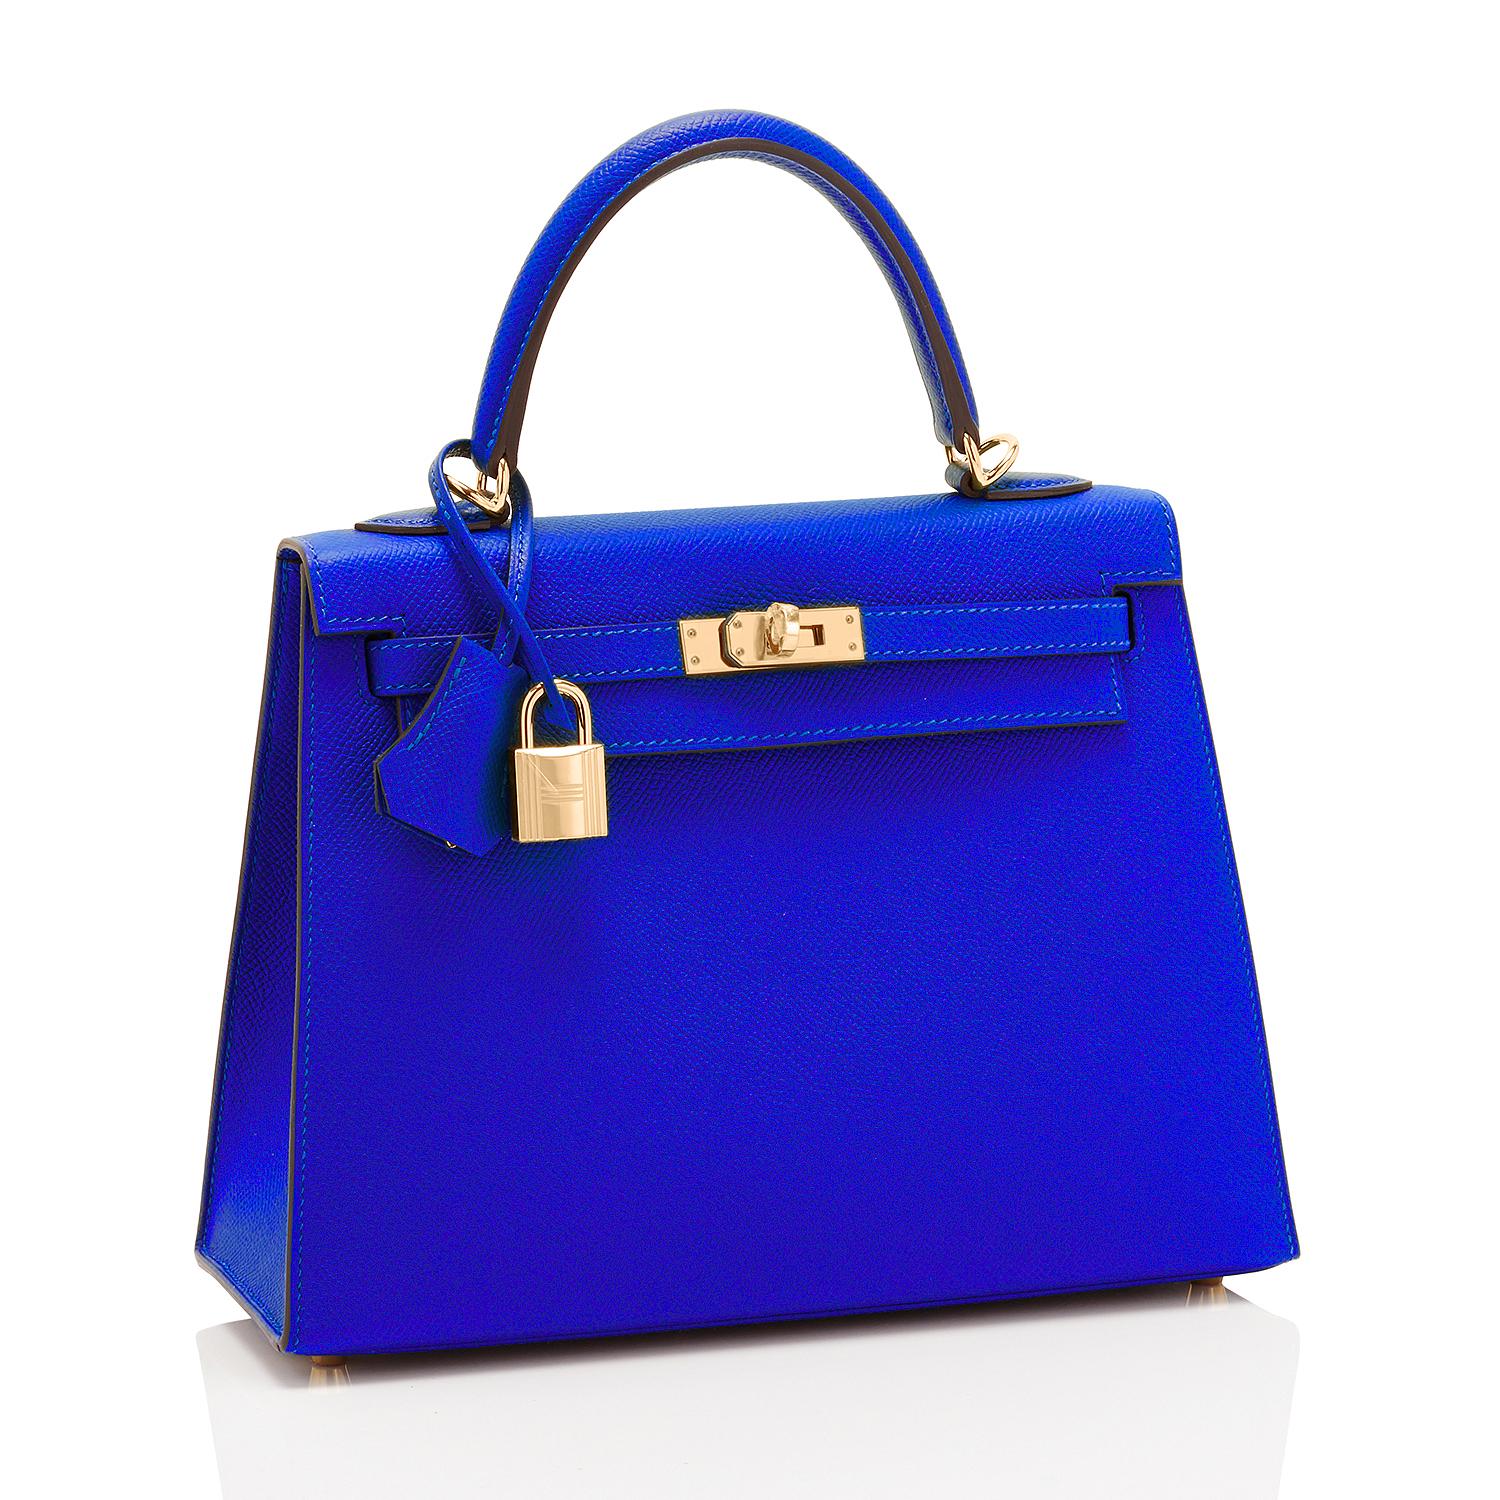 Hermes Kelly 25cm Blue Electric Epsom Sellier Gold Hardware NEW RARE
Brand New in Box. Store Fresh. Pristine Condition (with plastic on hardware). 
Perfect gift!  Comes full set with keys, lock, clochette, shoulder strap, sleeper, rain protector,